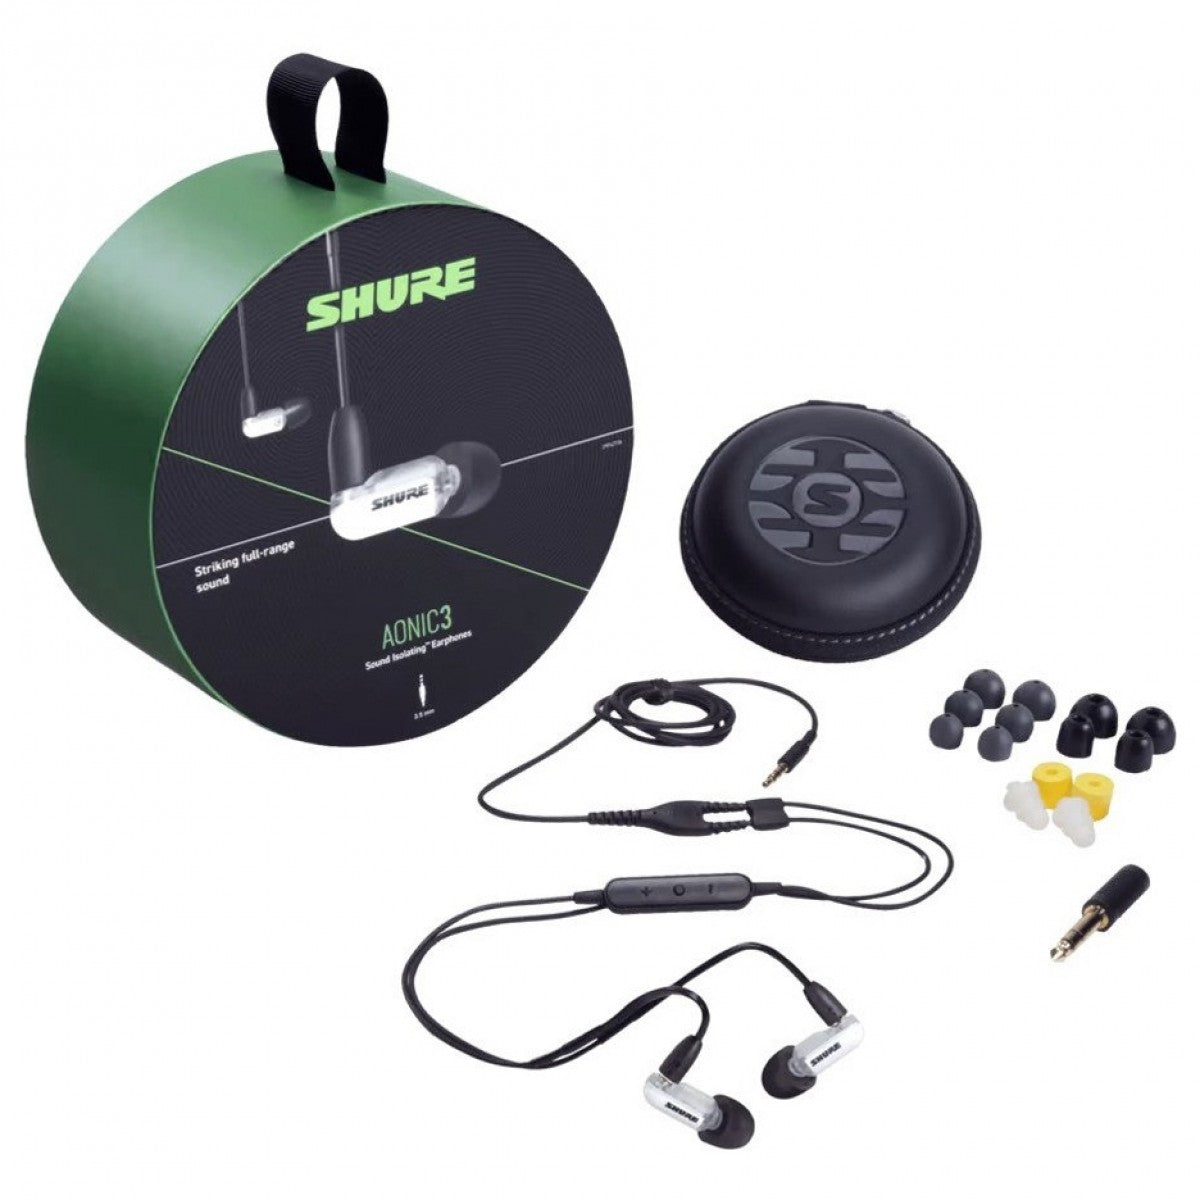 Shure AONIC 3 Sound Isolating Earphones White